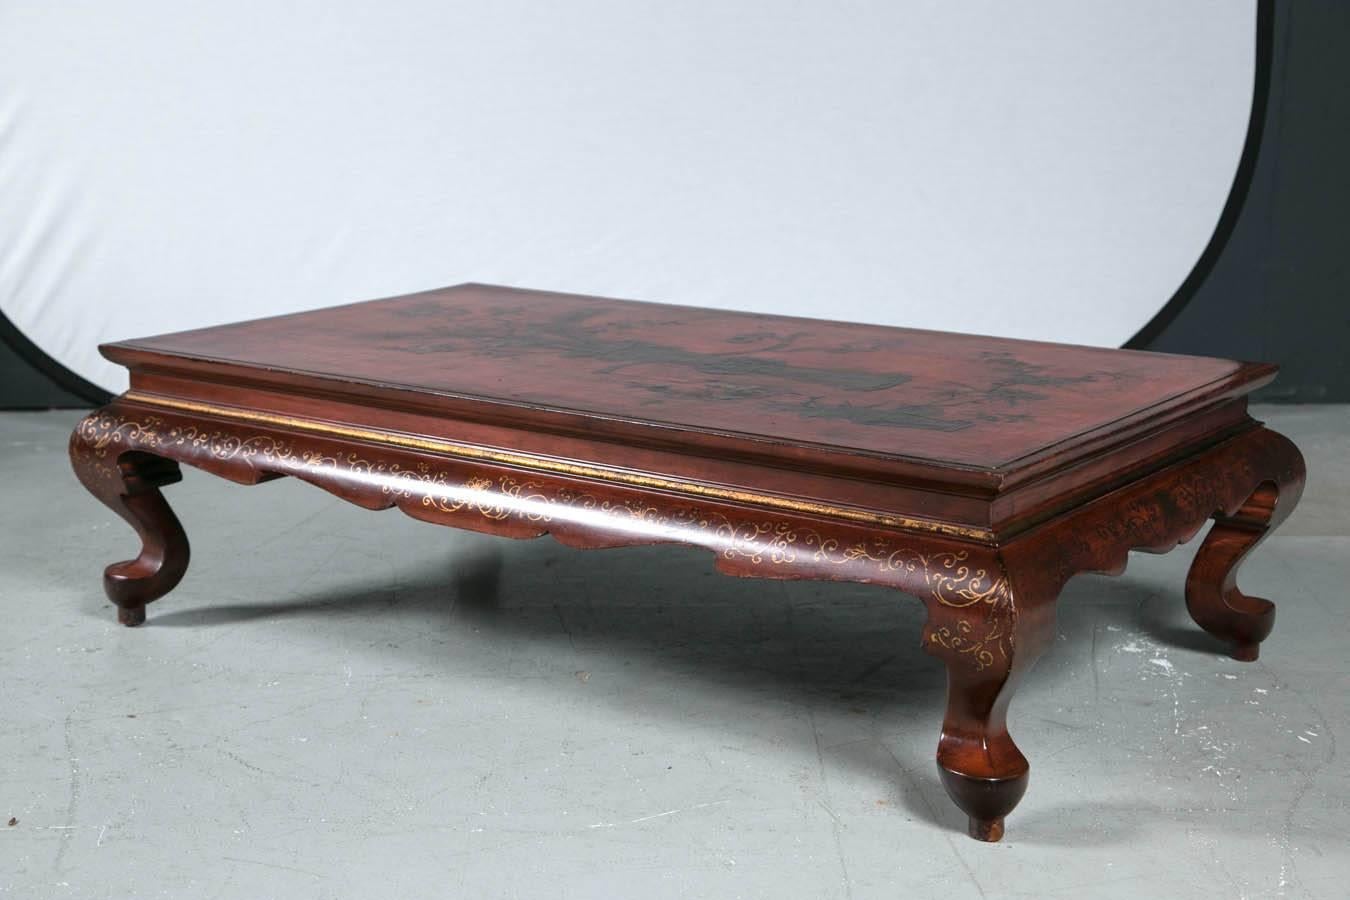 Fabulous red lacquer Chinese coffee table, circa 1950s. Lovely decoration with great style.